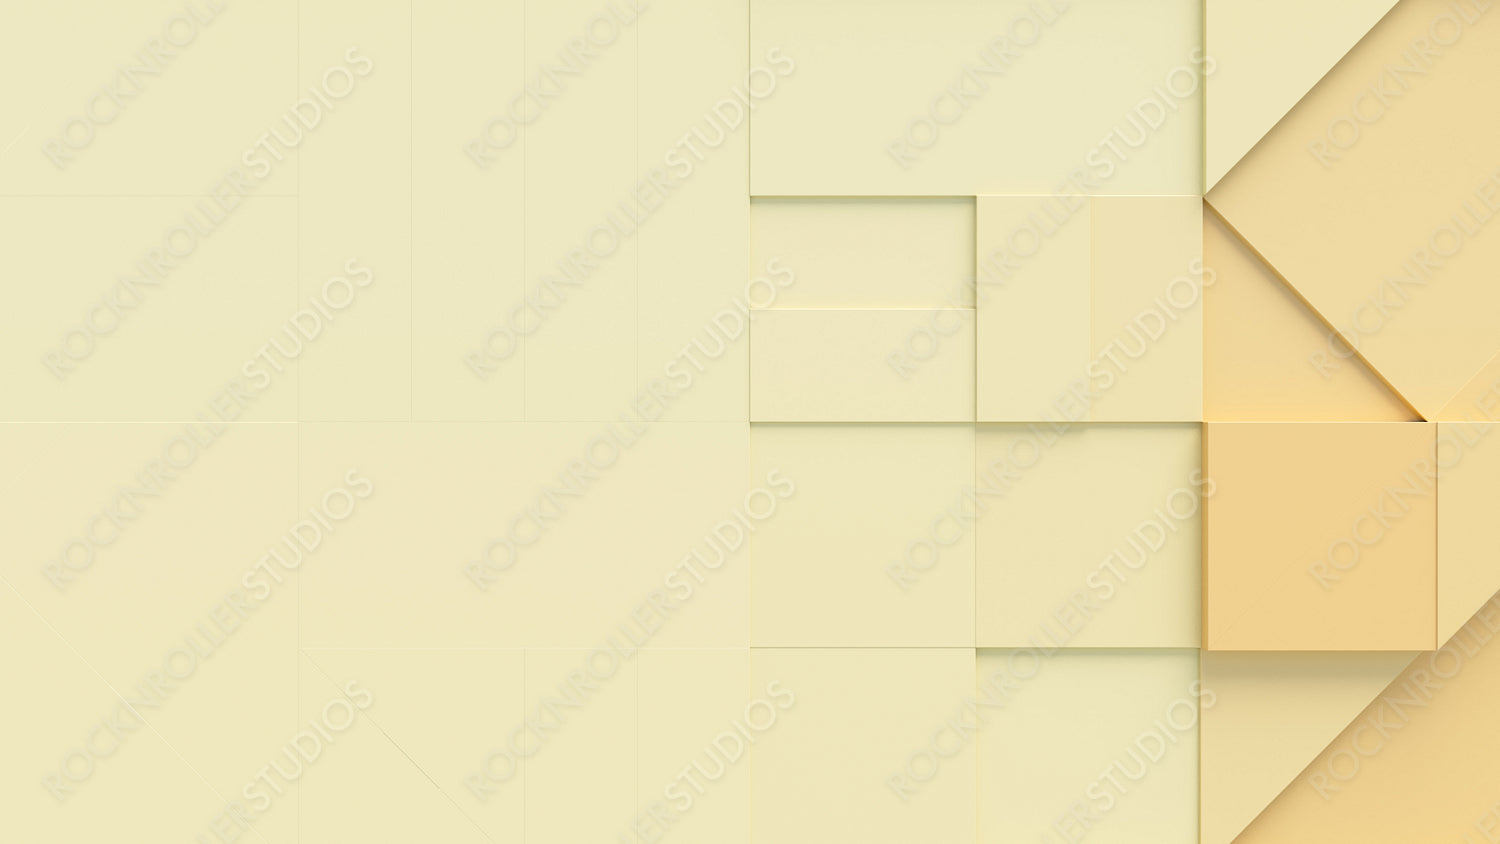 Collection of Orange and Yellow 3D Shapes form a wall. Tech background with copy-space.